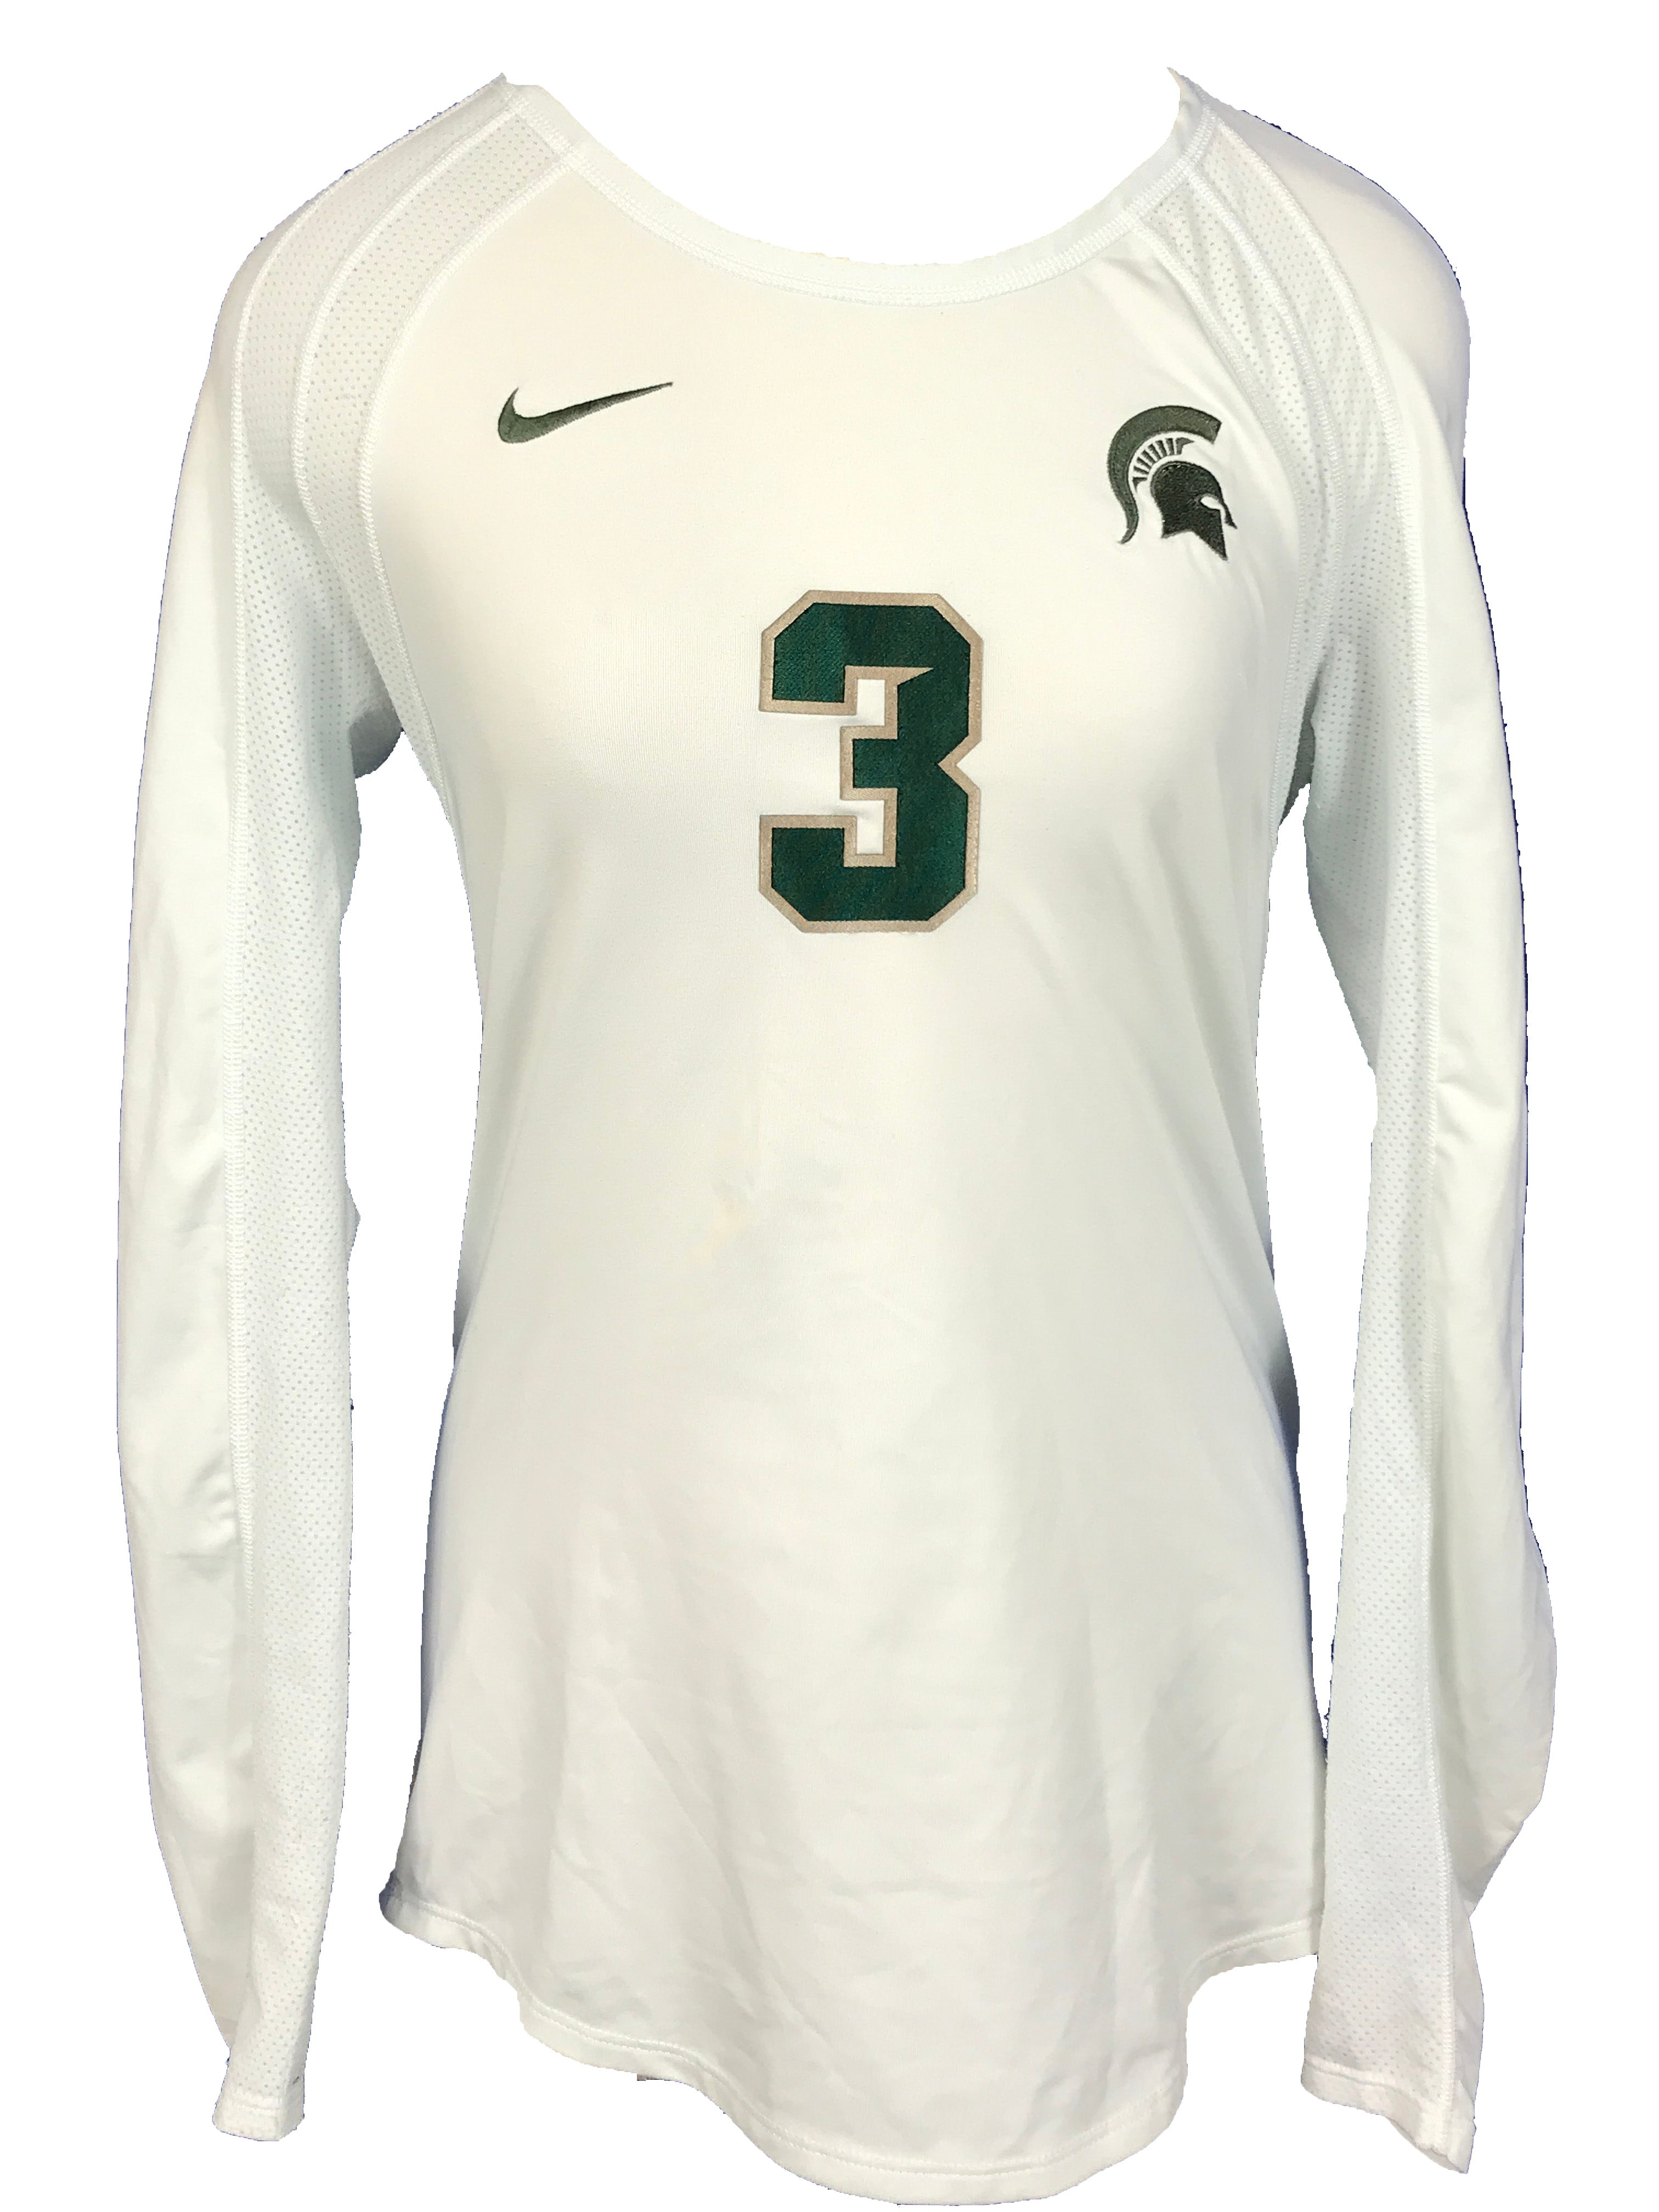 Nike White Long Sleeve Volleyball Jersey #3 Women's Size L